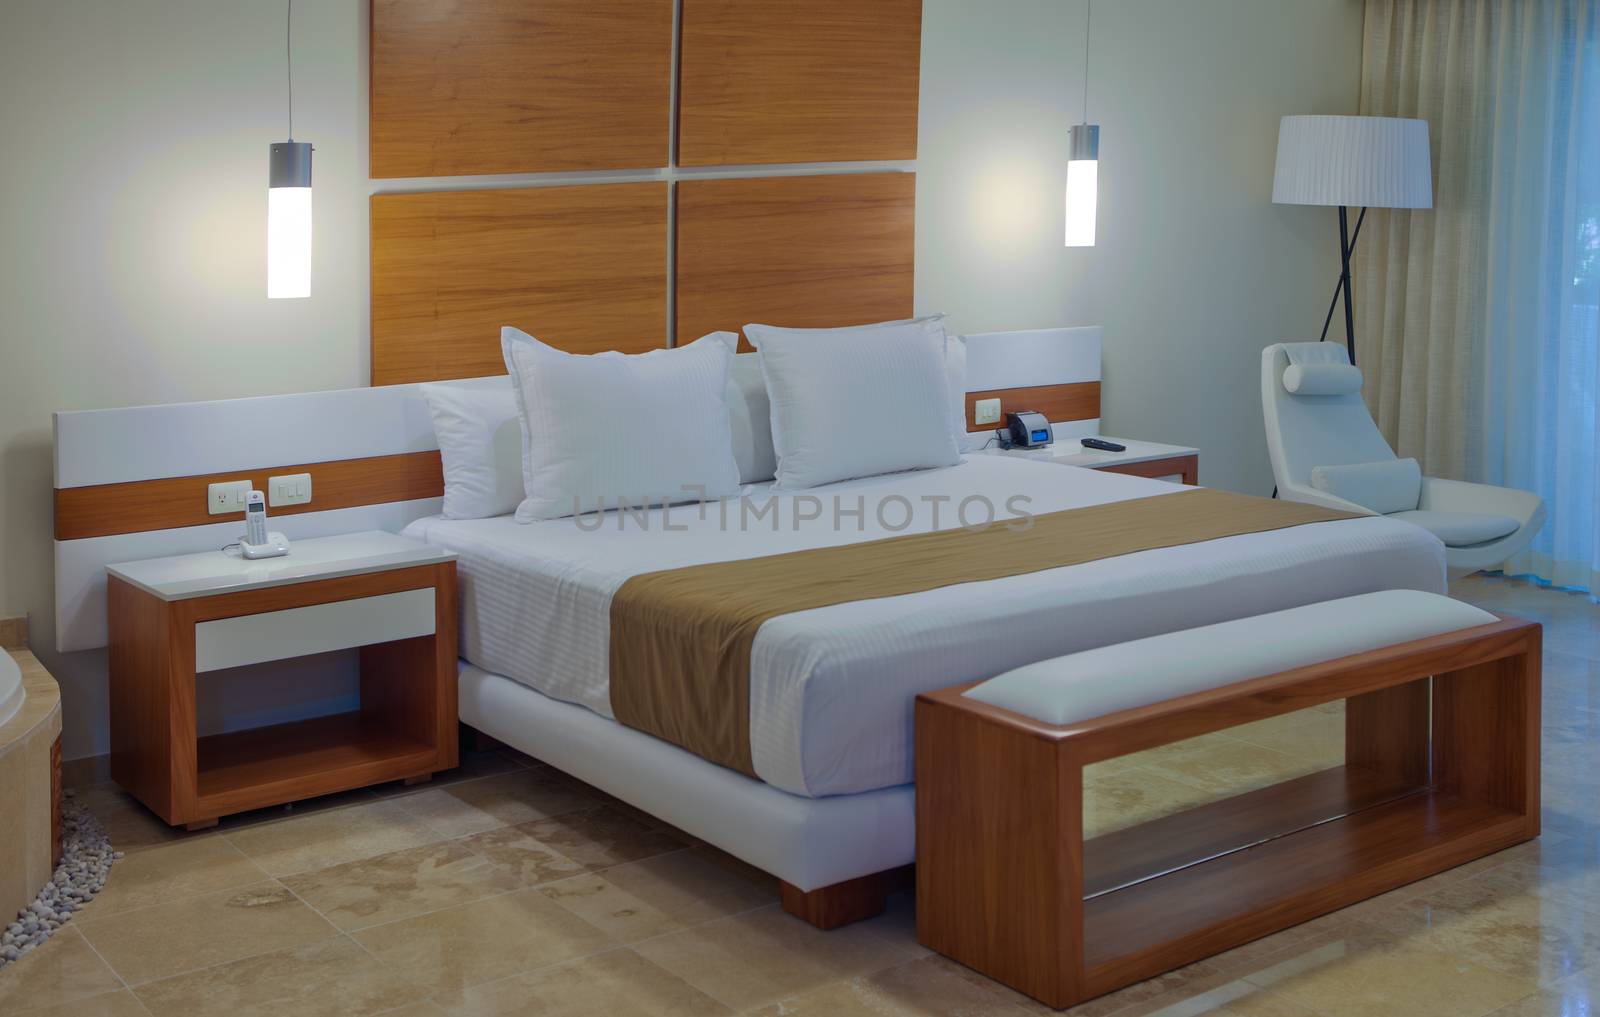 Bedroom interior in a house or hotel with minimalist decor in neutral tones and a large double bed